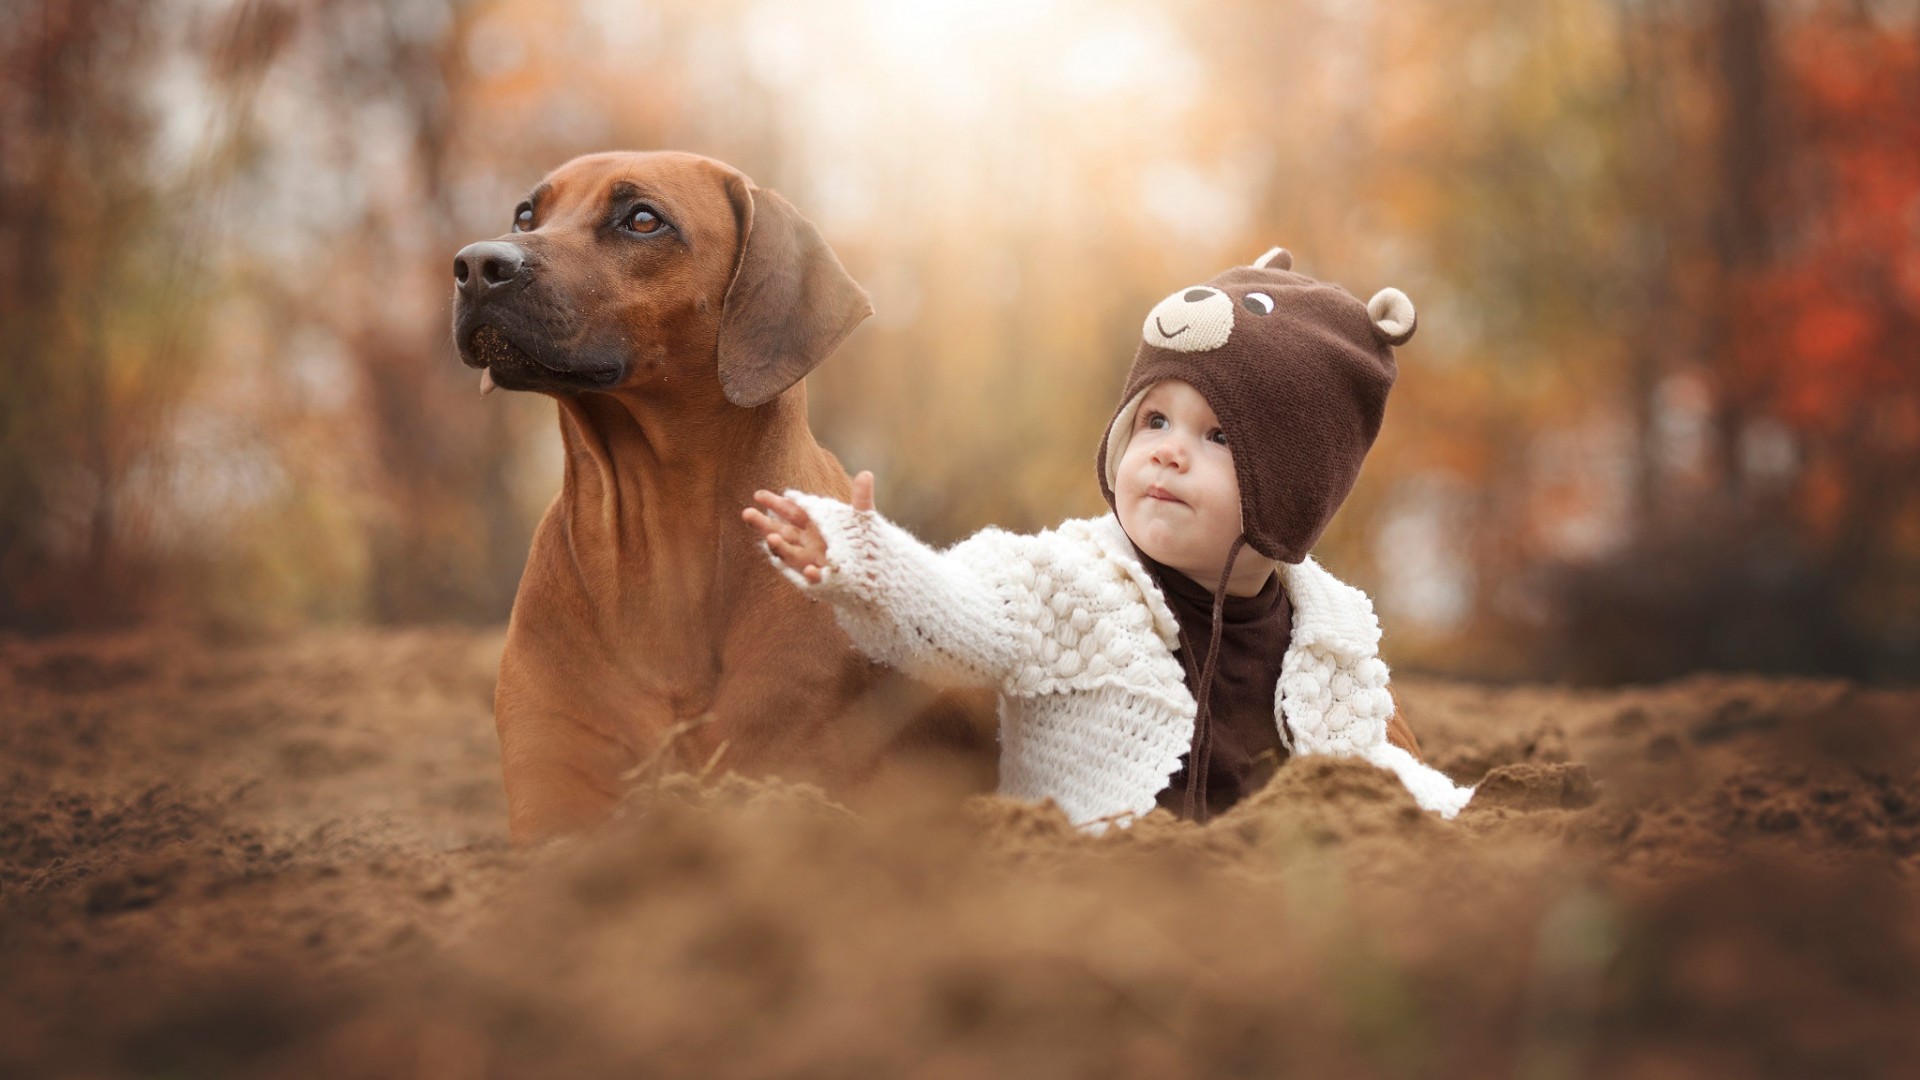 People 1920x1080 animals dog baby hat depth of field mammals outdoors